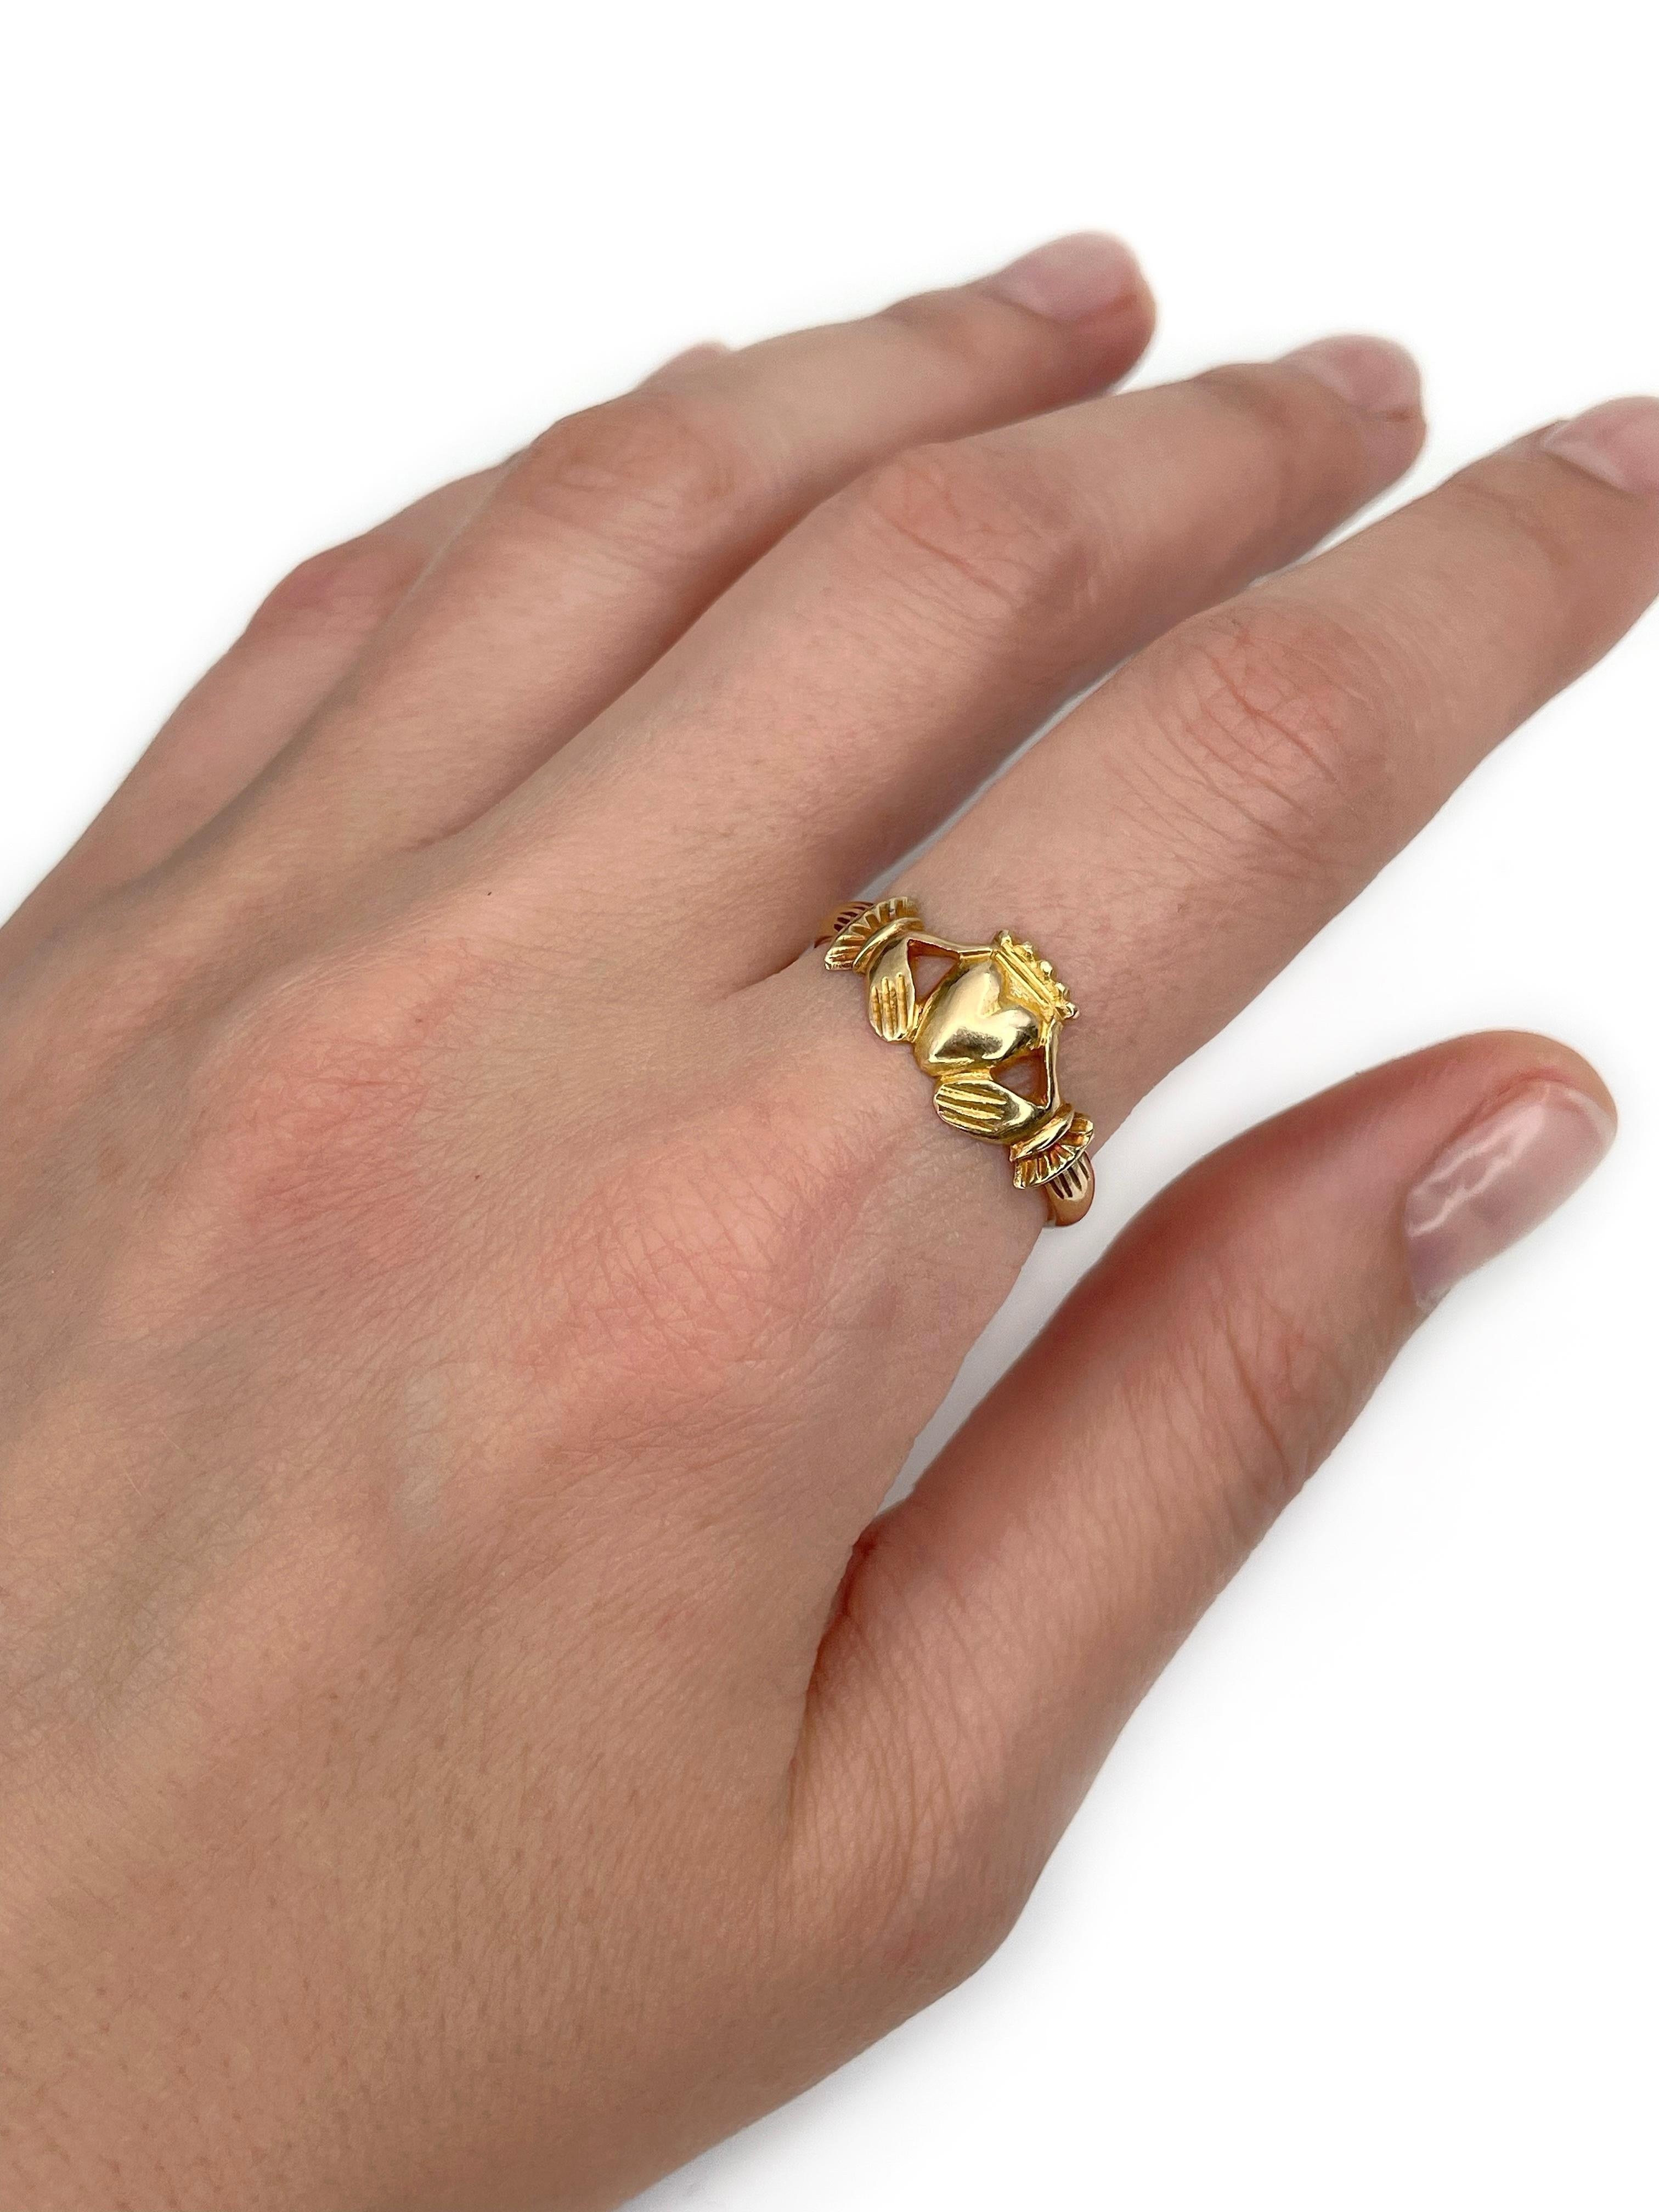 This is an antique Claddagh engagement ring crafted in 18K yellow gold.

Has an owl hallmark stamped on the shank. 

The Claddagh is a traditional Irish jewelry motif that dates back to the 17th century. The heart symbolizes love, the crown -